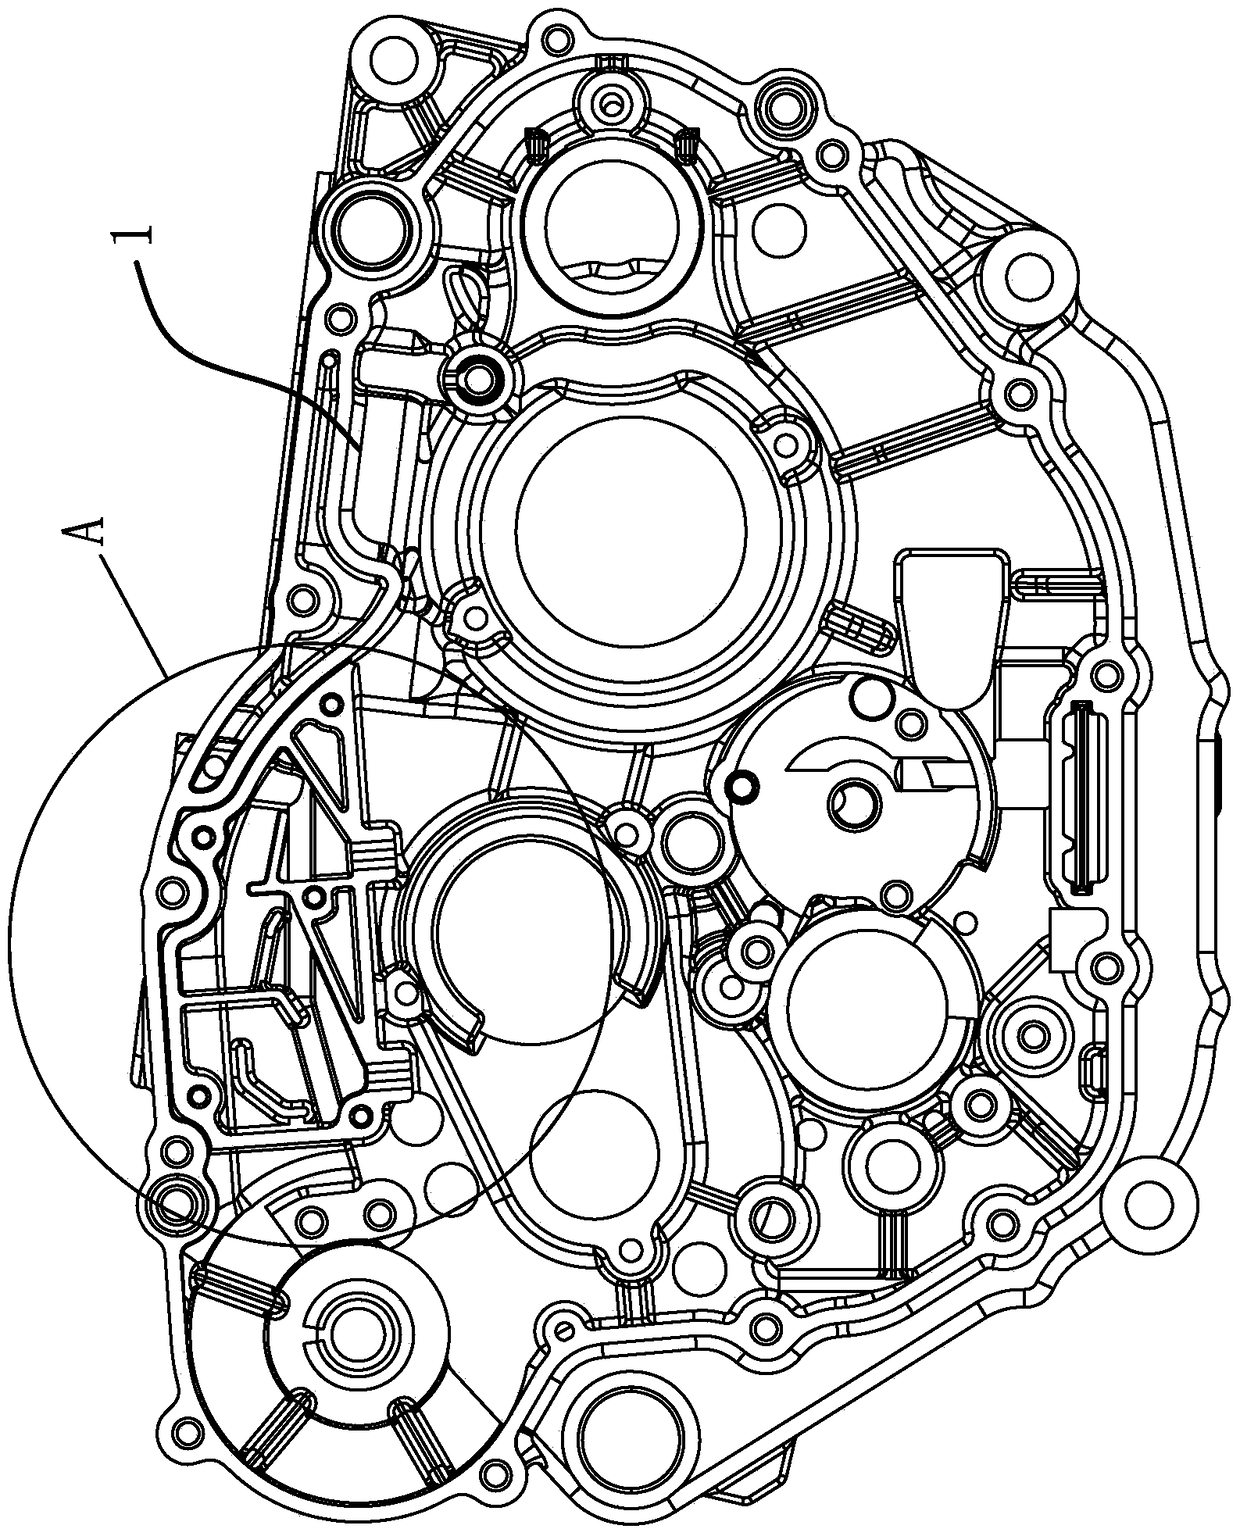 An oil-gas separator on a motorcycle engine case